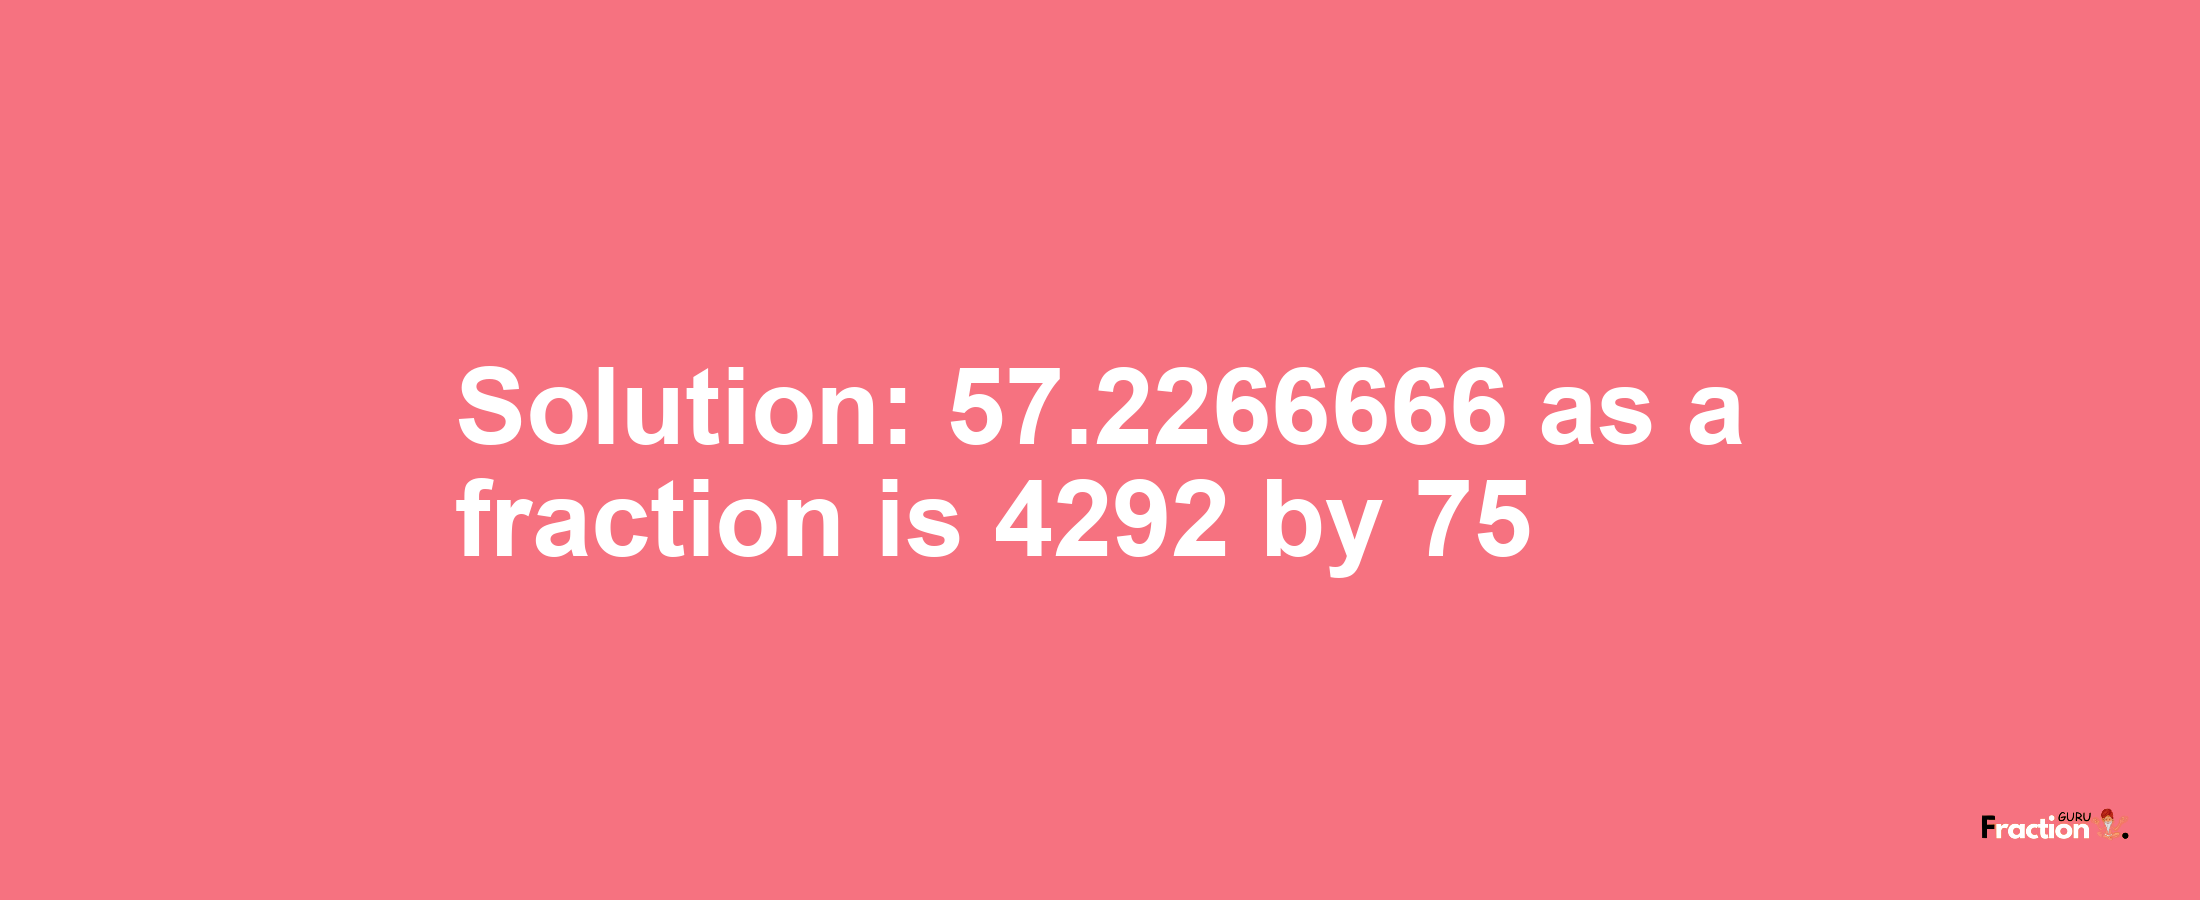 Solution:57.2266666 as a fraction is 4292/75